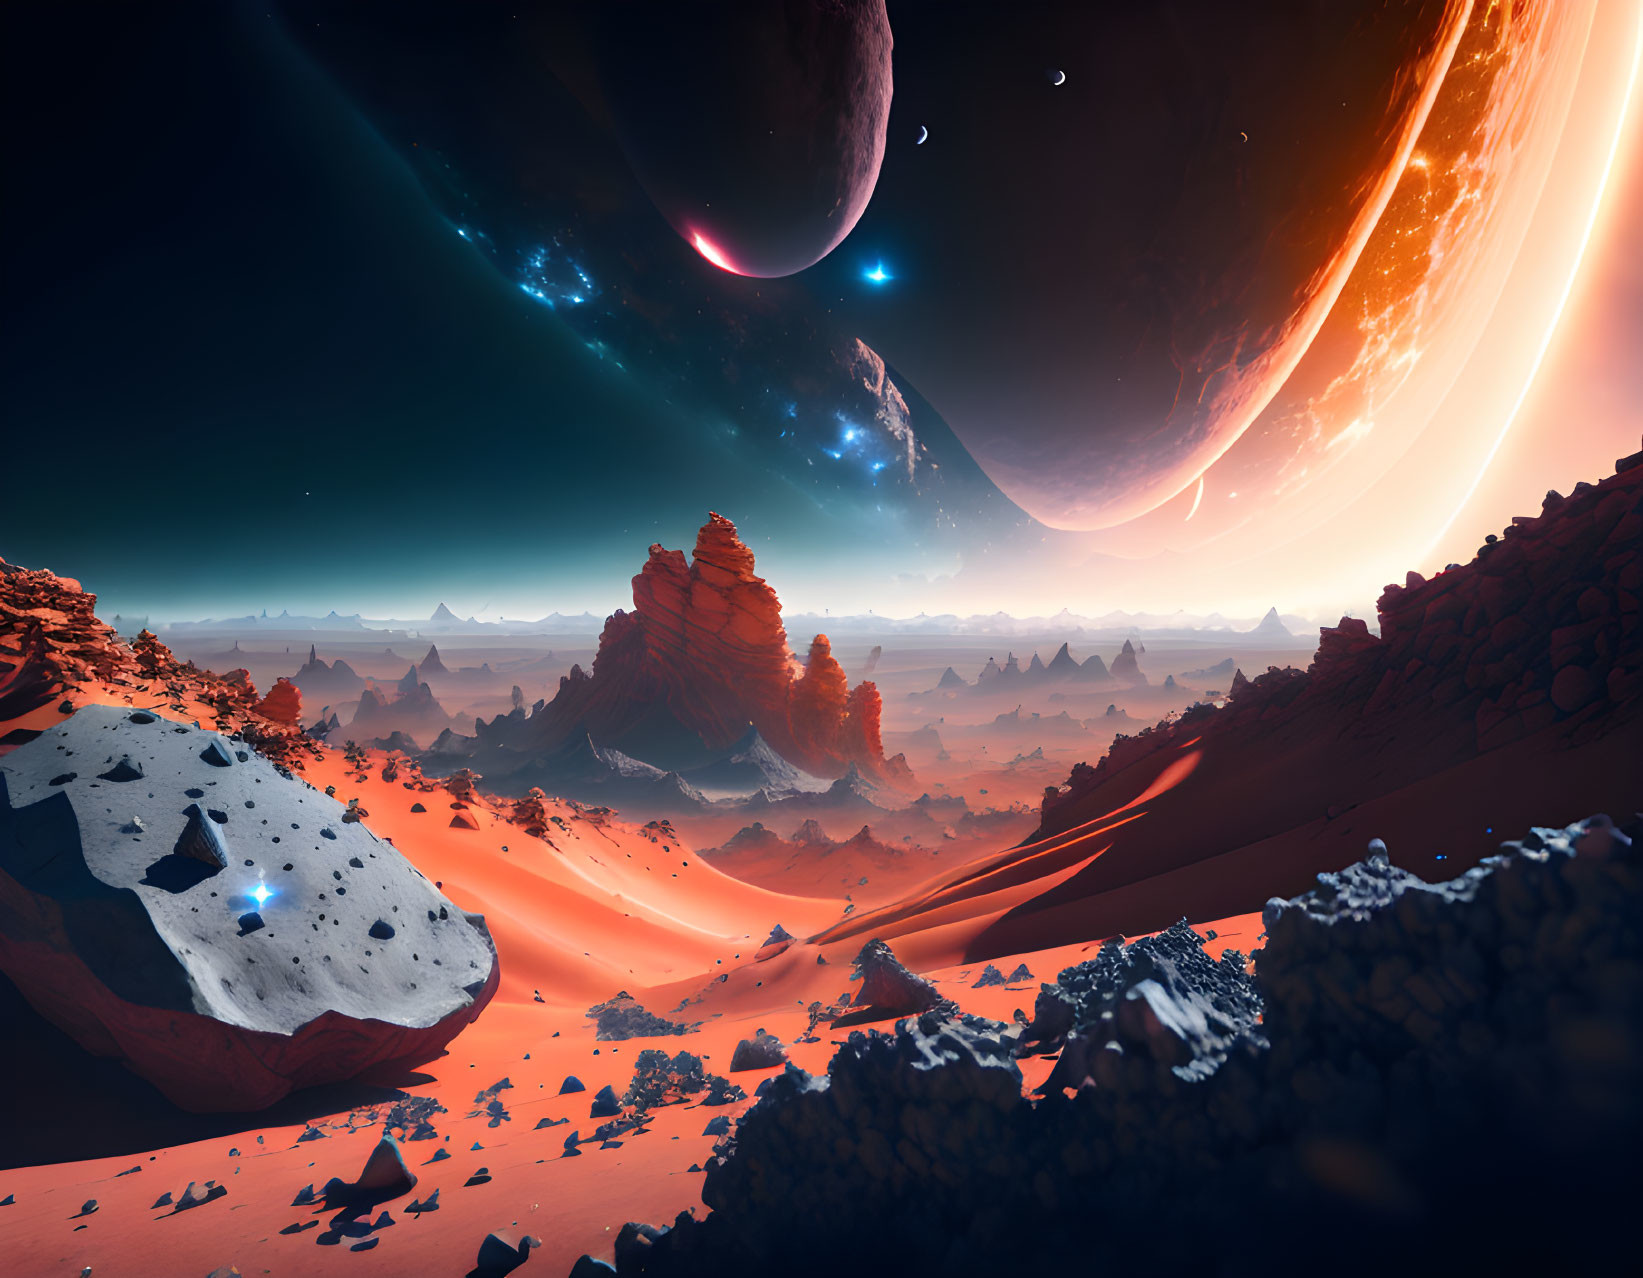 Surreal sci-fi landscape with desert, floating rocks, and massive planets